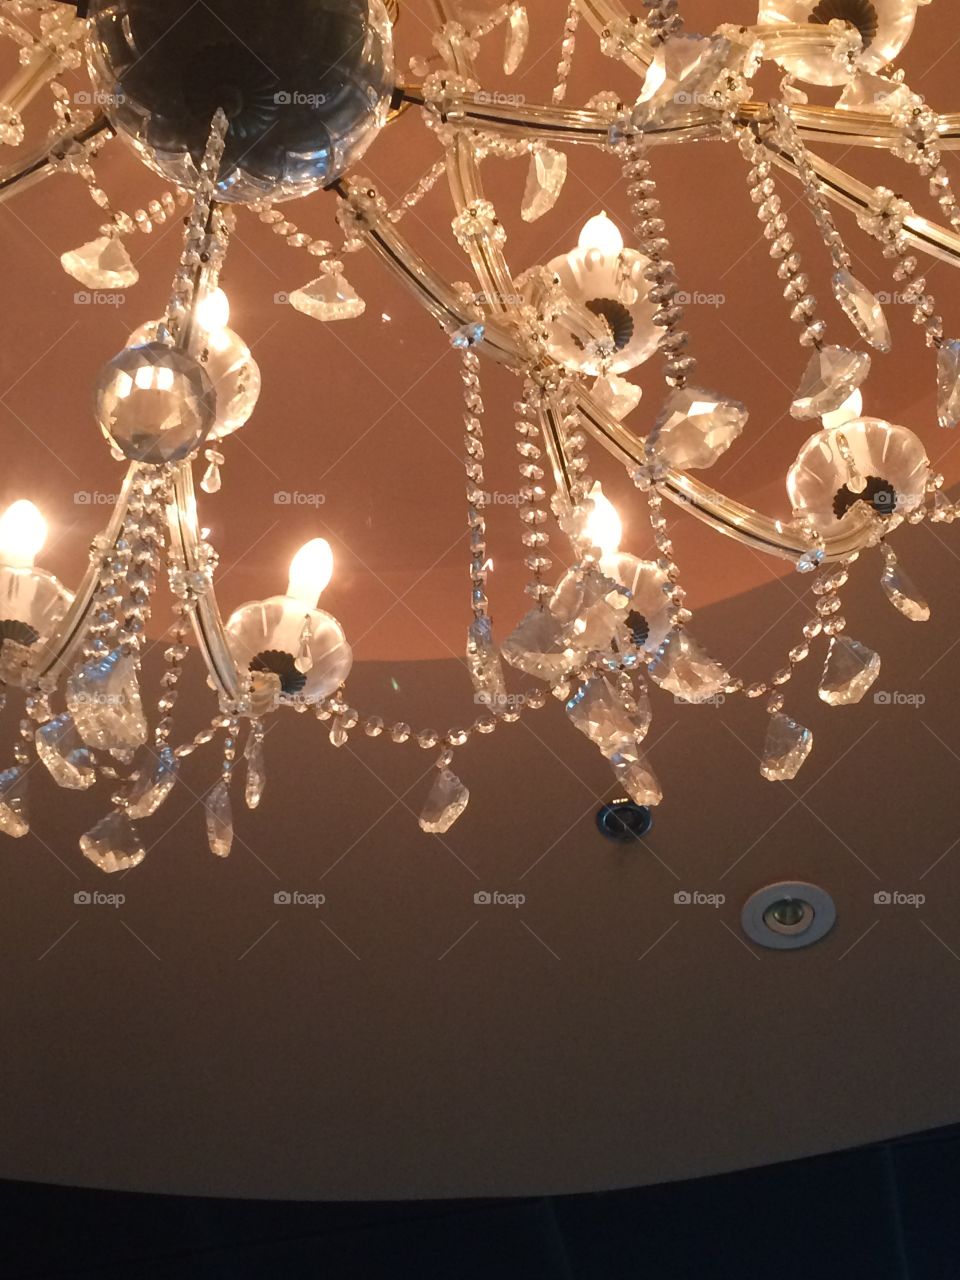 A close up of a stunning chandelier.